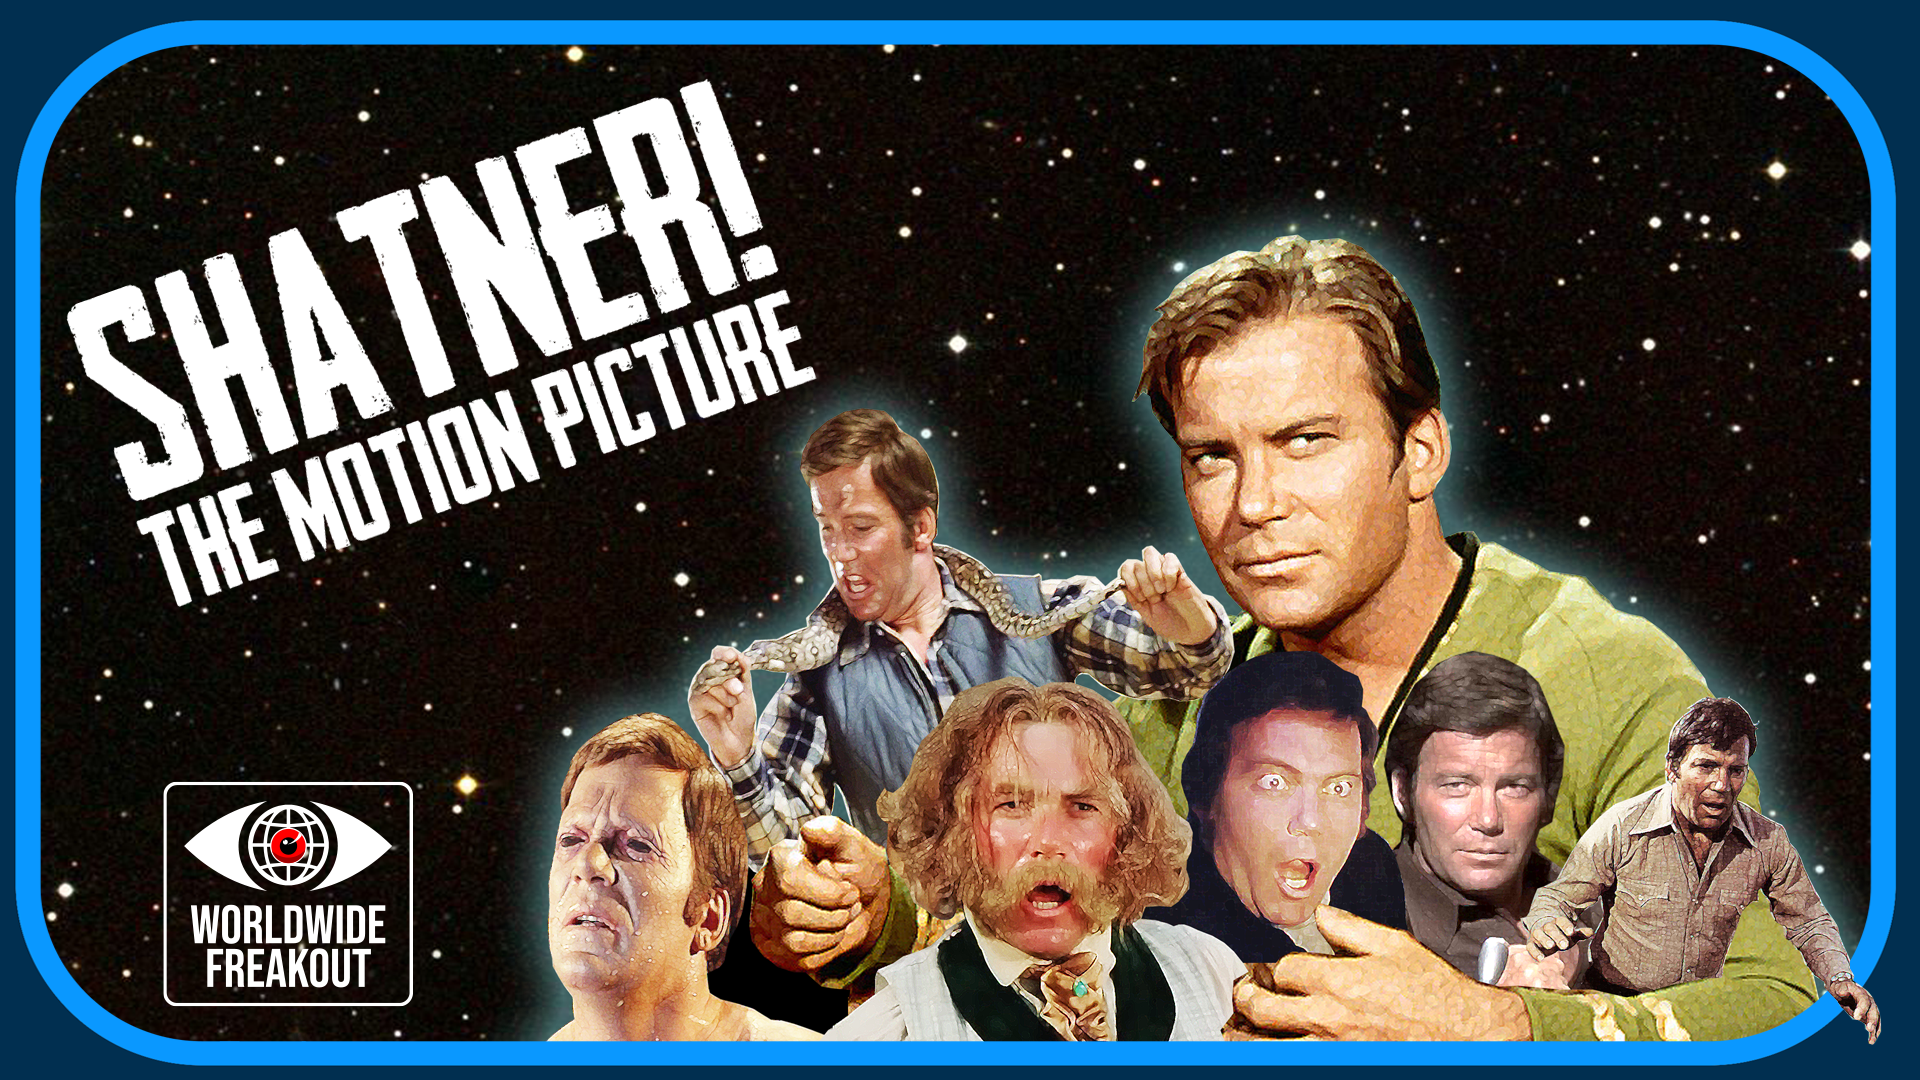 SHATNER: The Motion Picture 